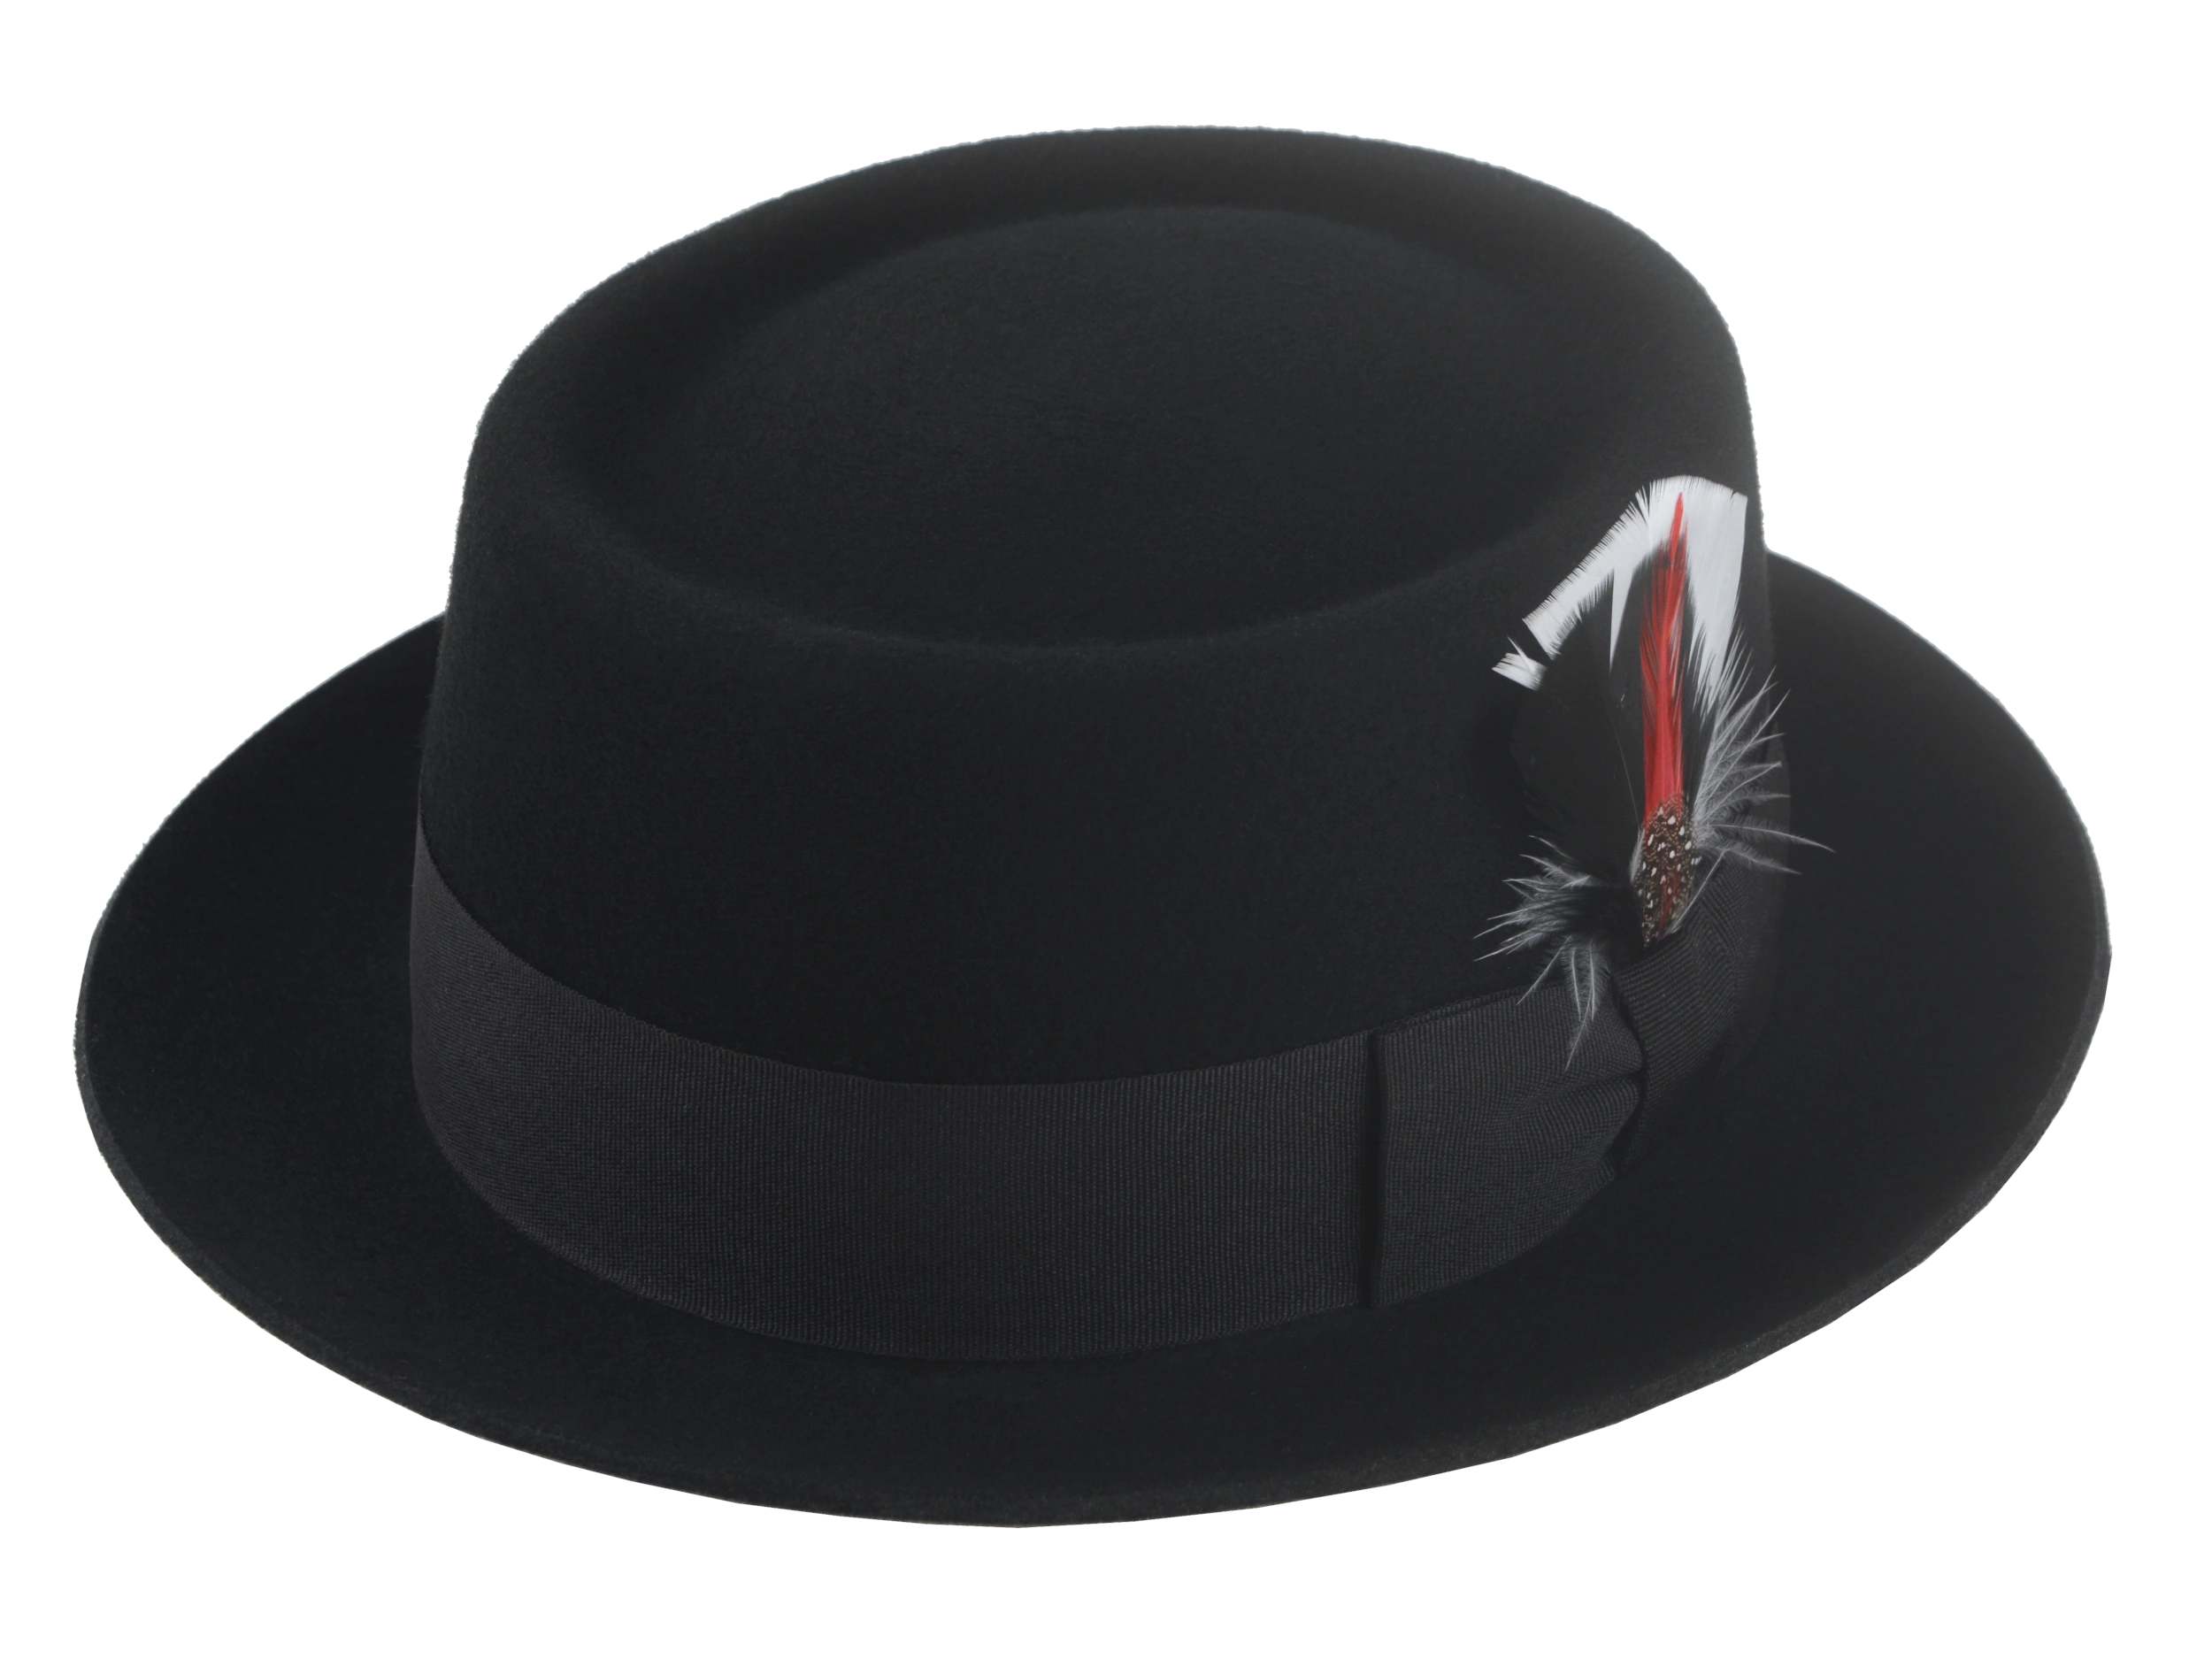 The Jazzist - Premium Wool Felt Porkpie Fedora For Men or Women with Feather in Black White and Red Color | Agnoulita Quality Custom Hats 1